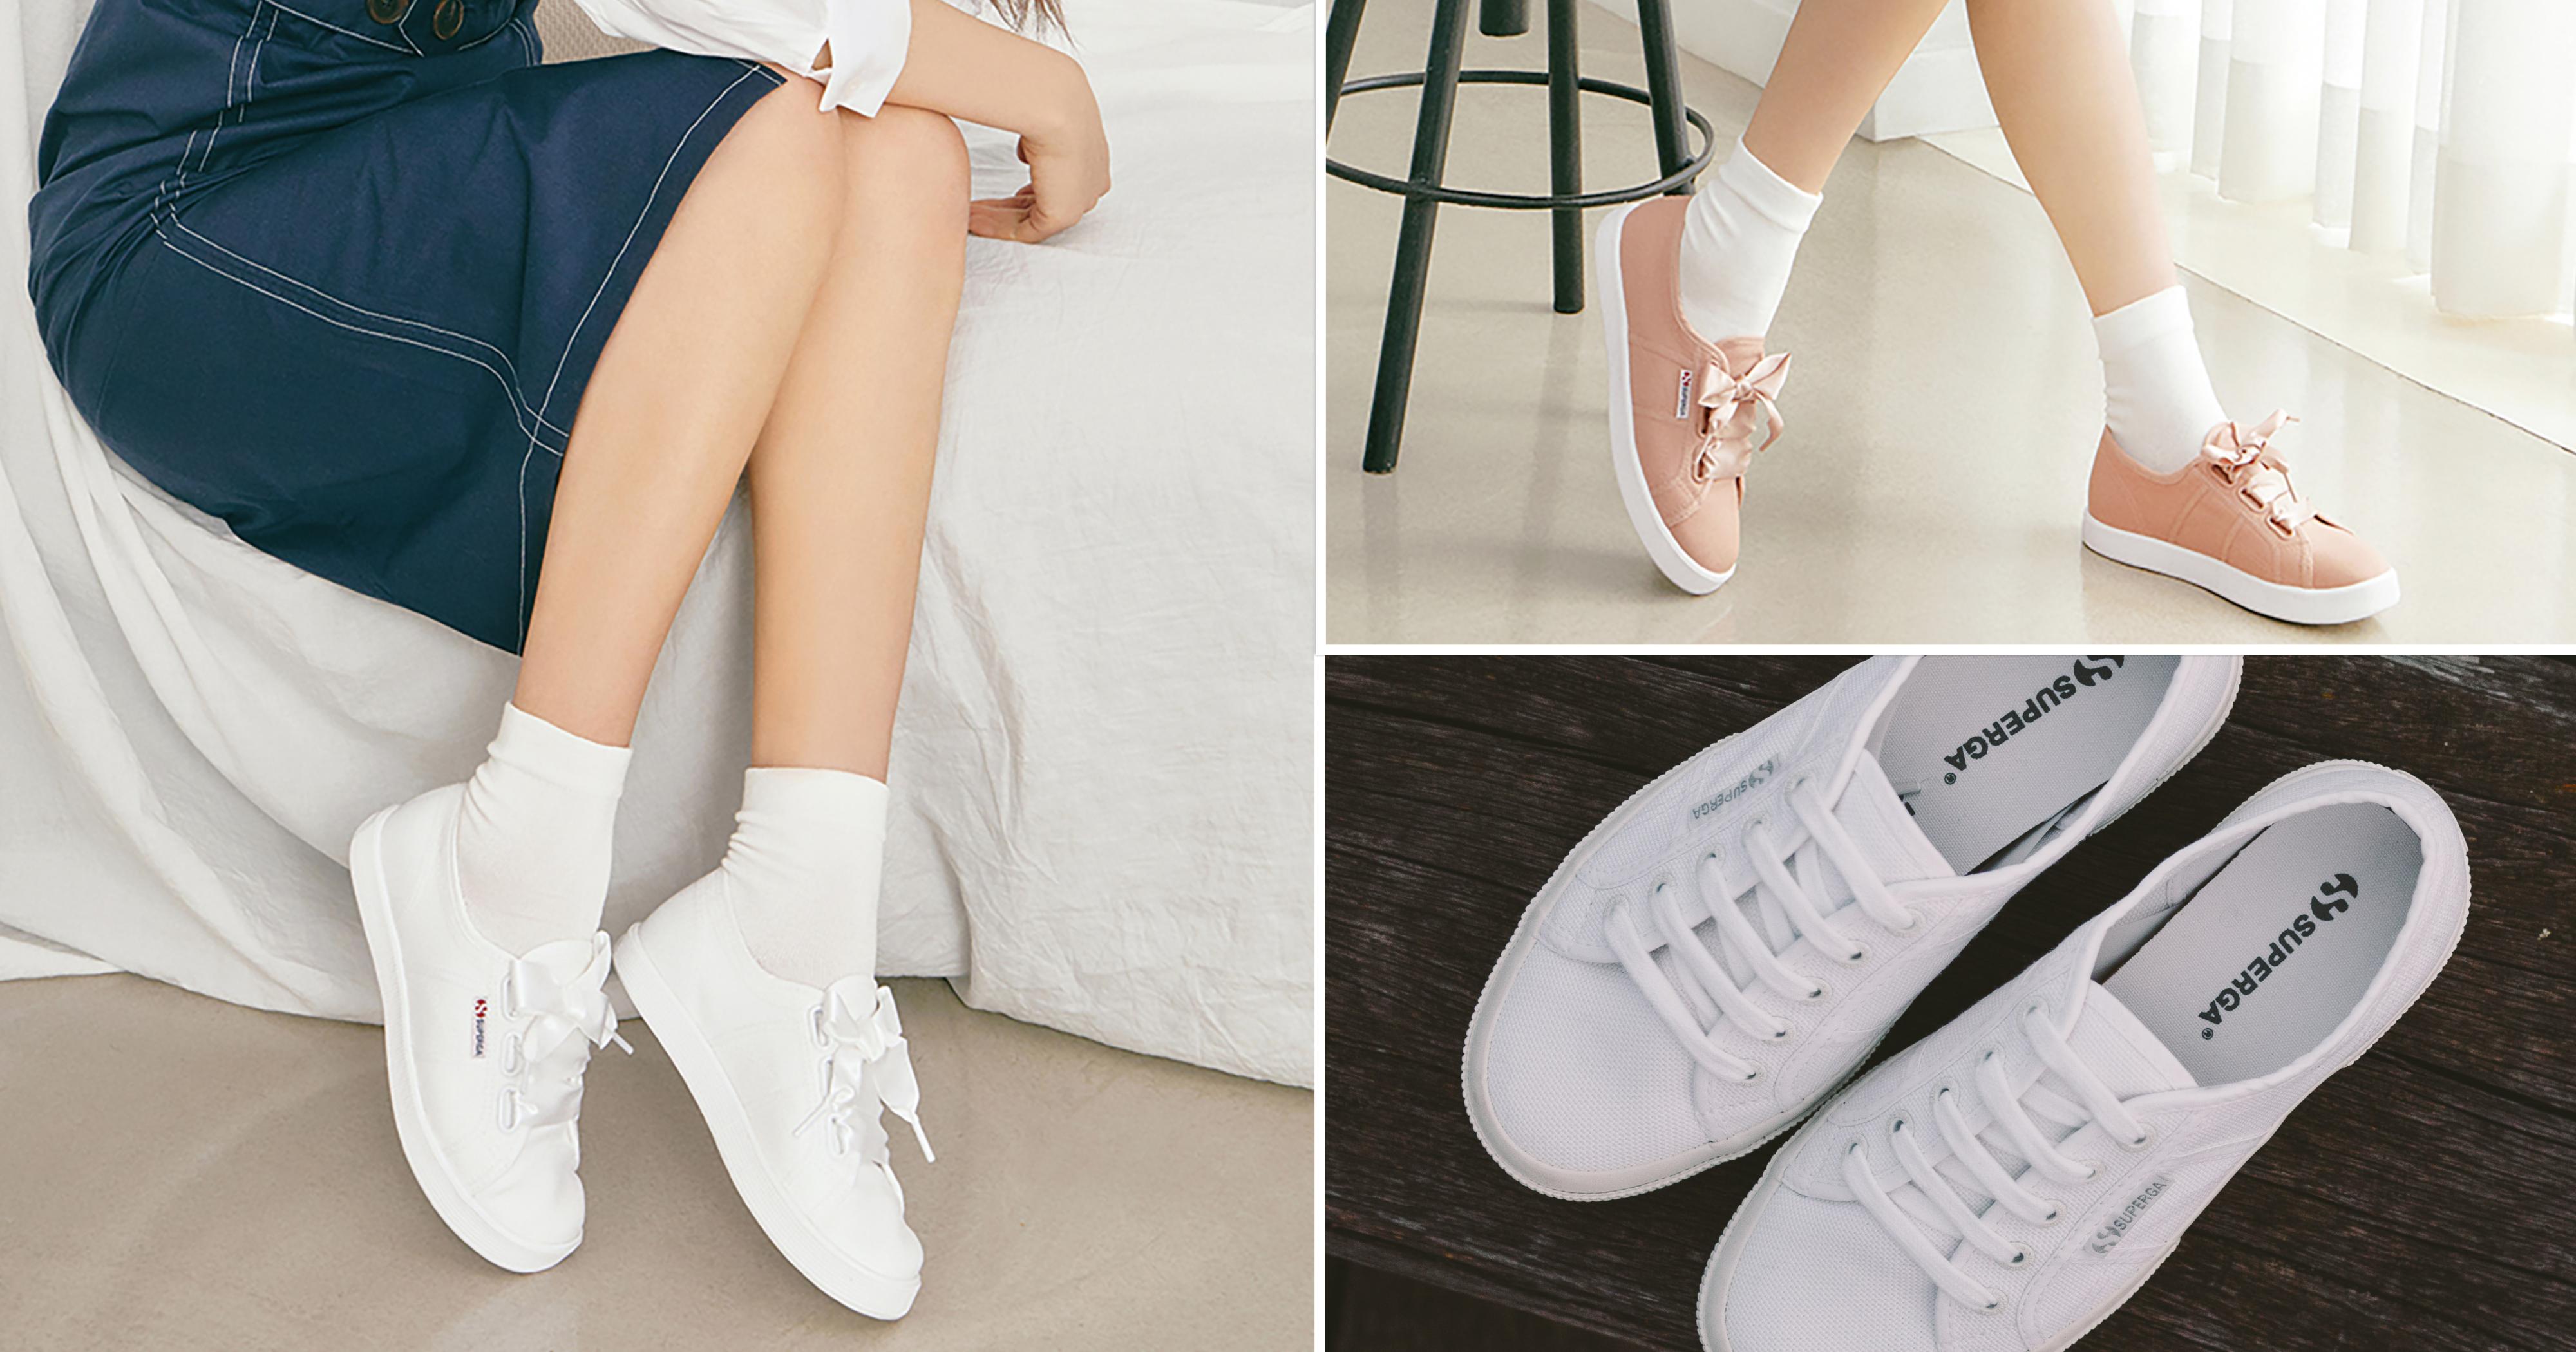 Superga sneakers on sale at Westgate 